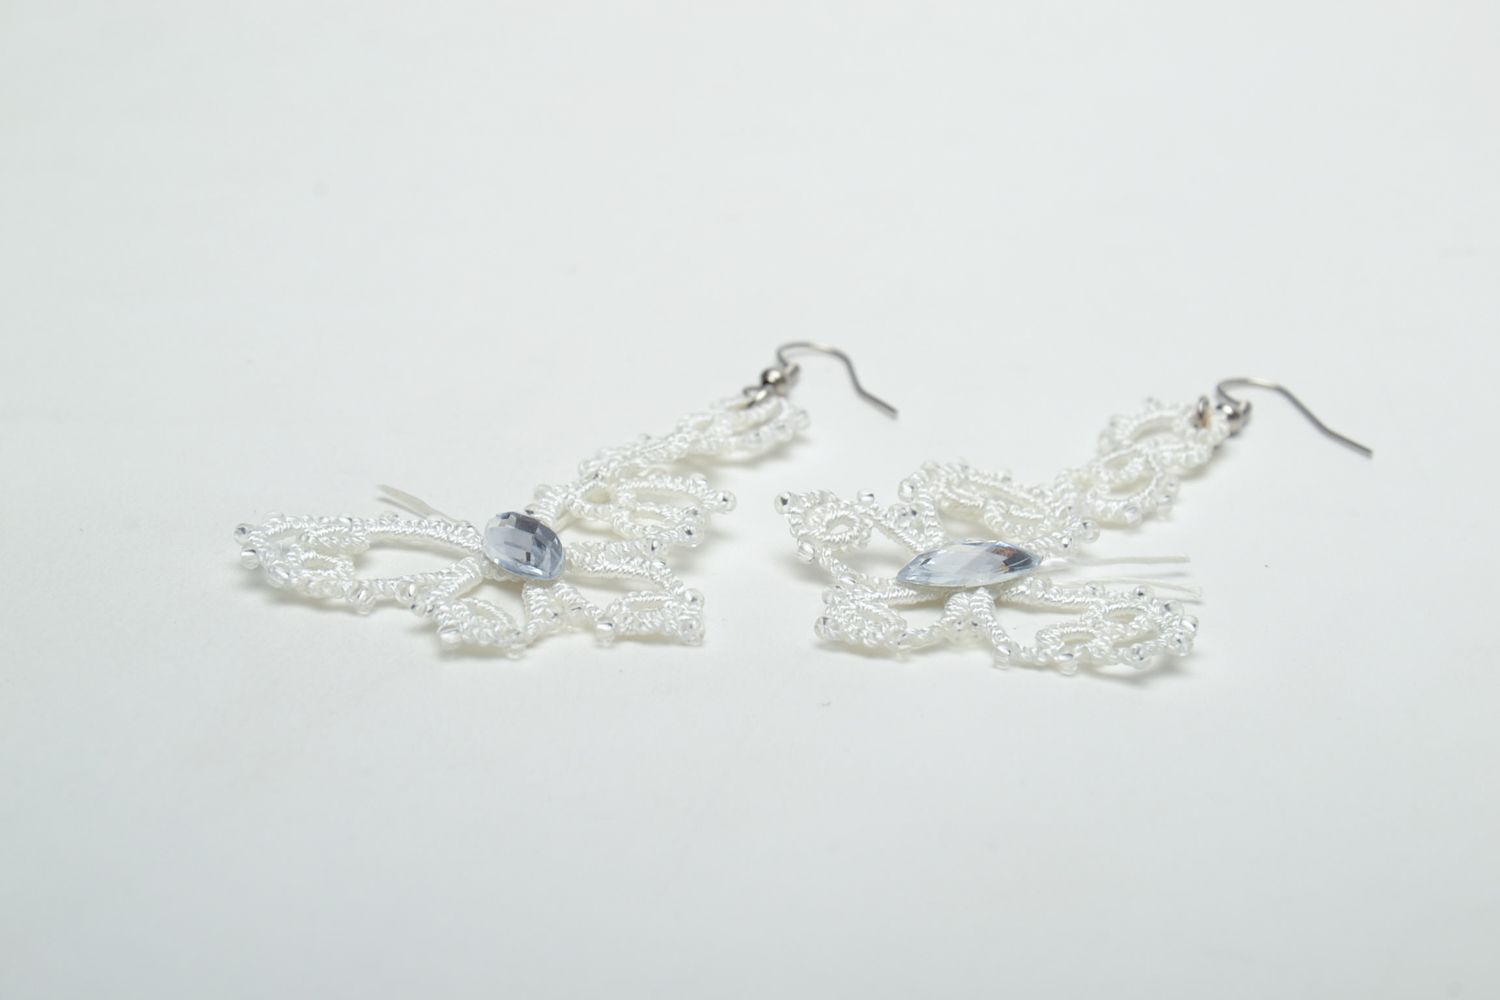 Lace earrings with beads made using tatting technique Butterflies photo 3